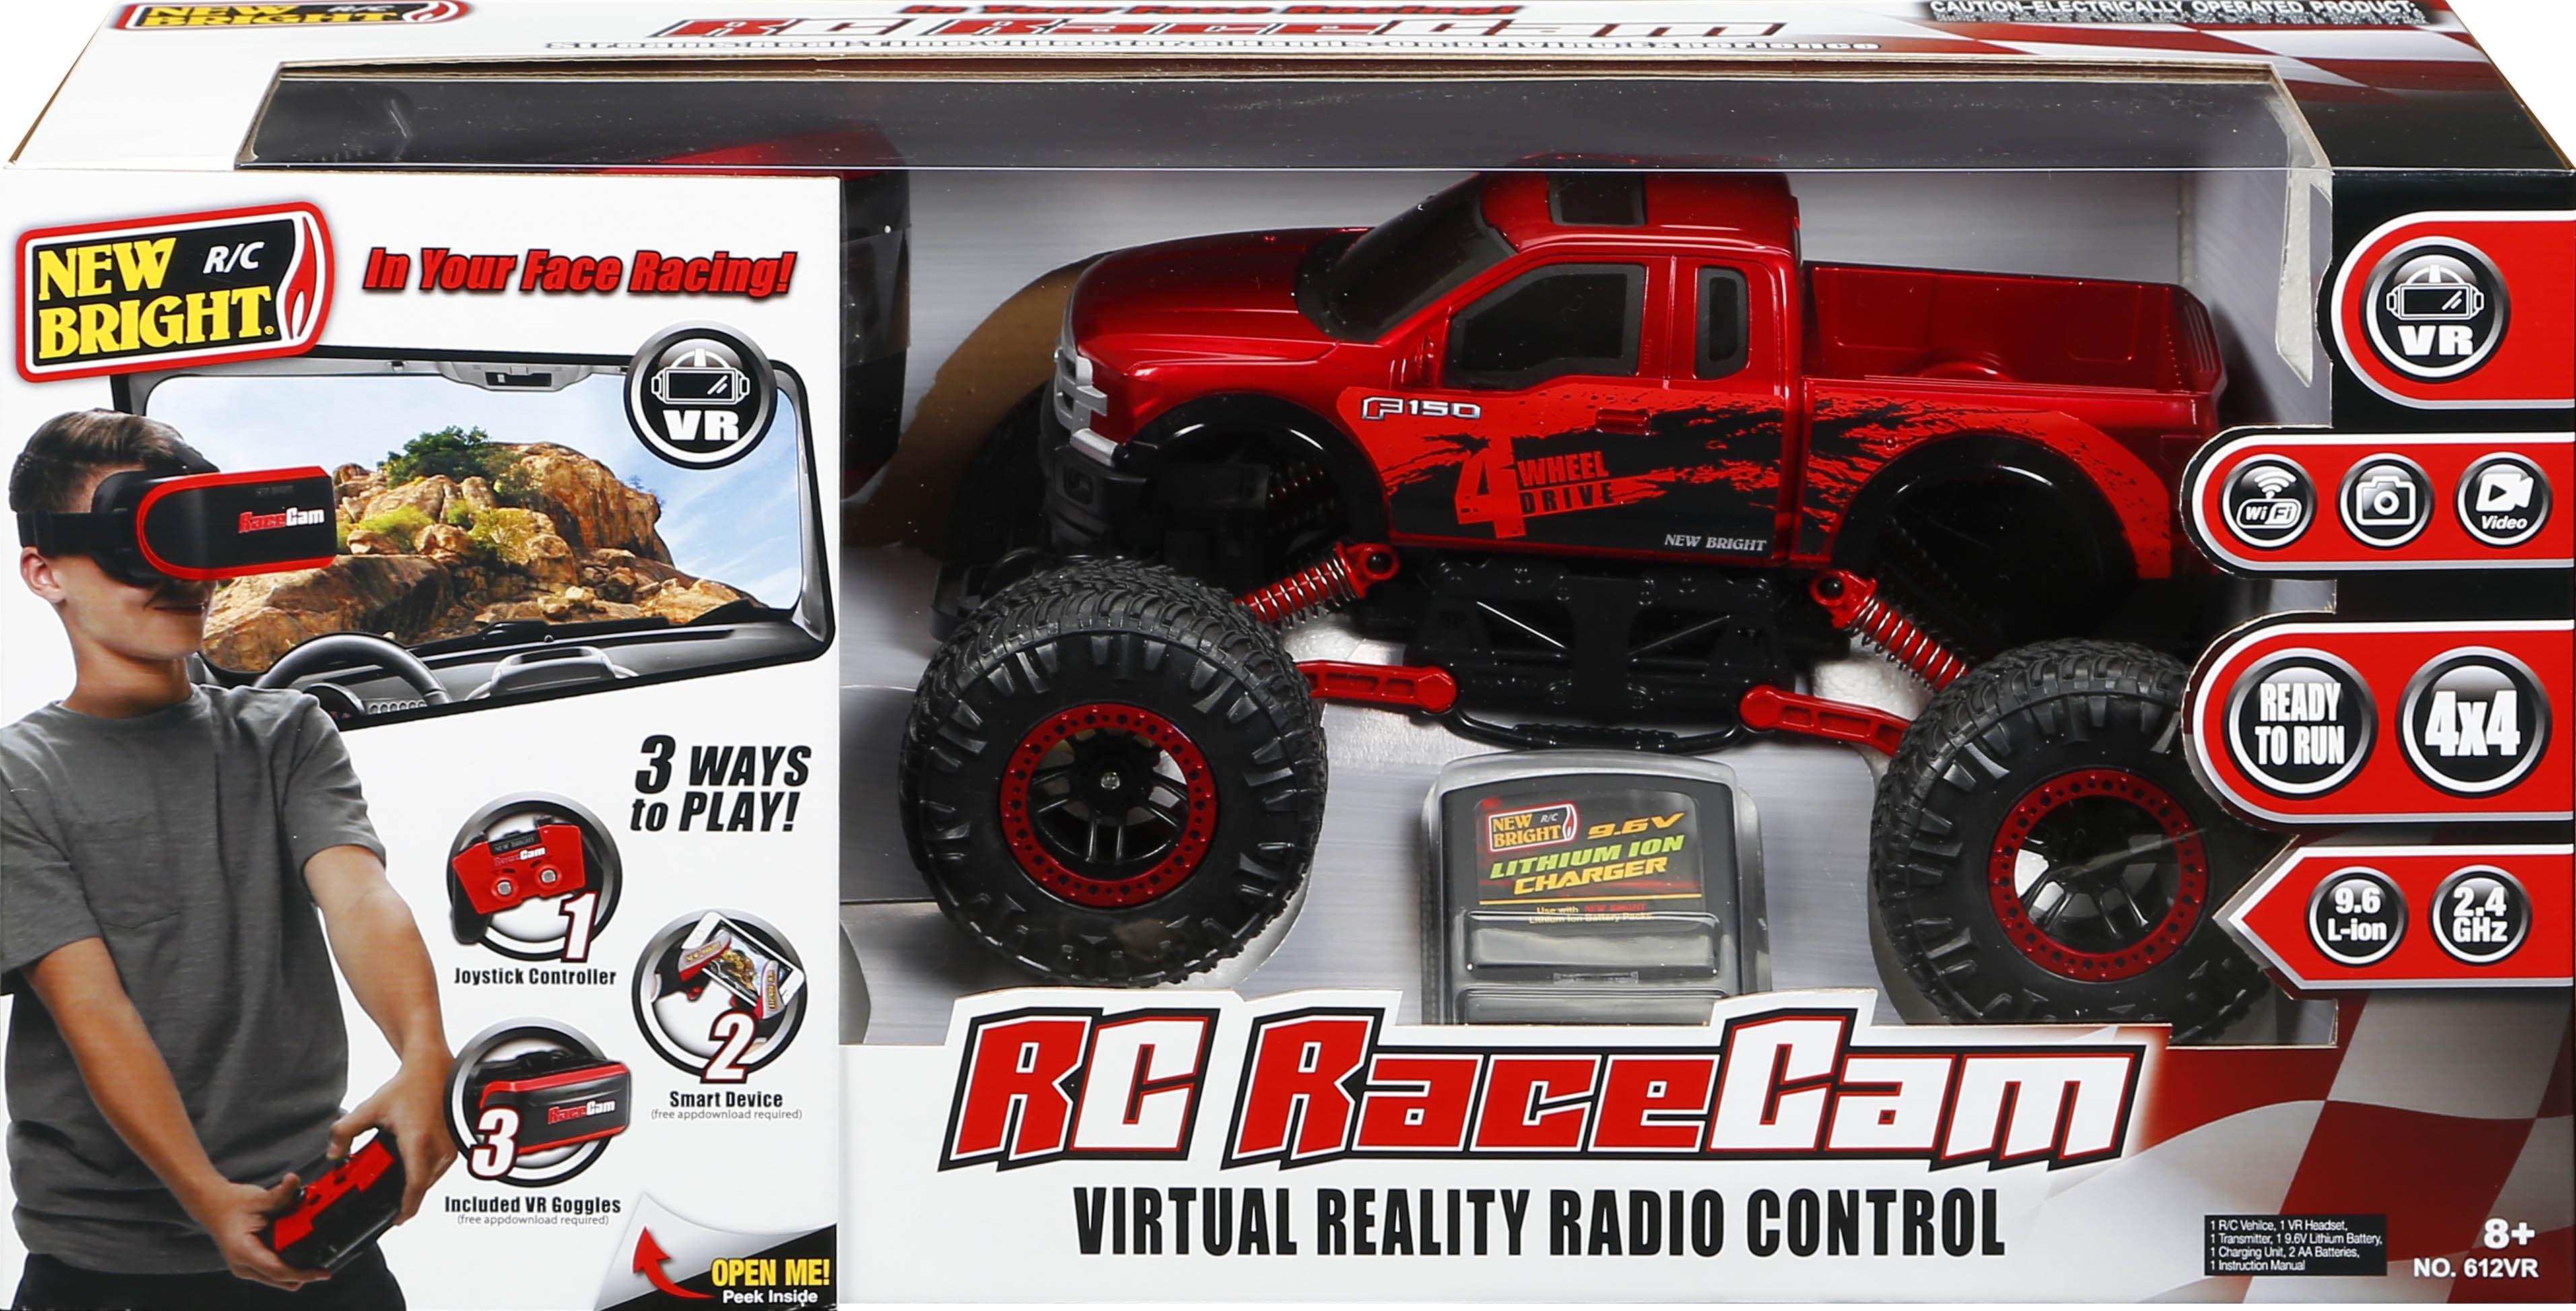 New Bright RC 1:12 Scale VR 4x4 Race 